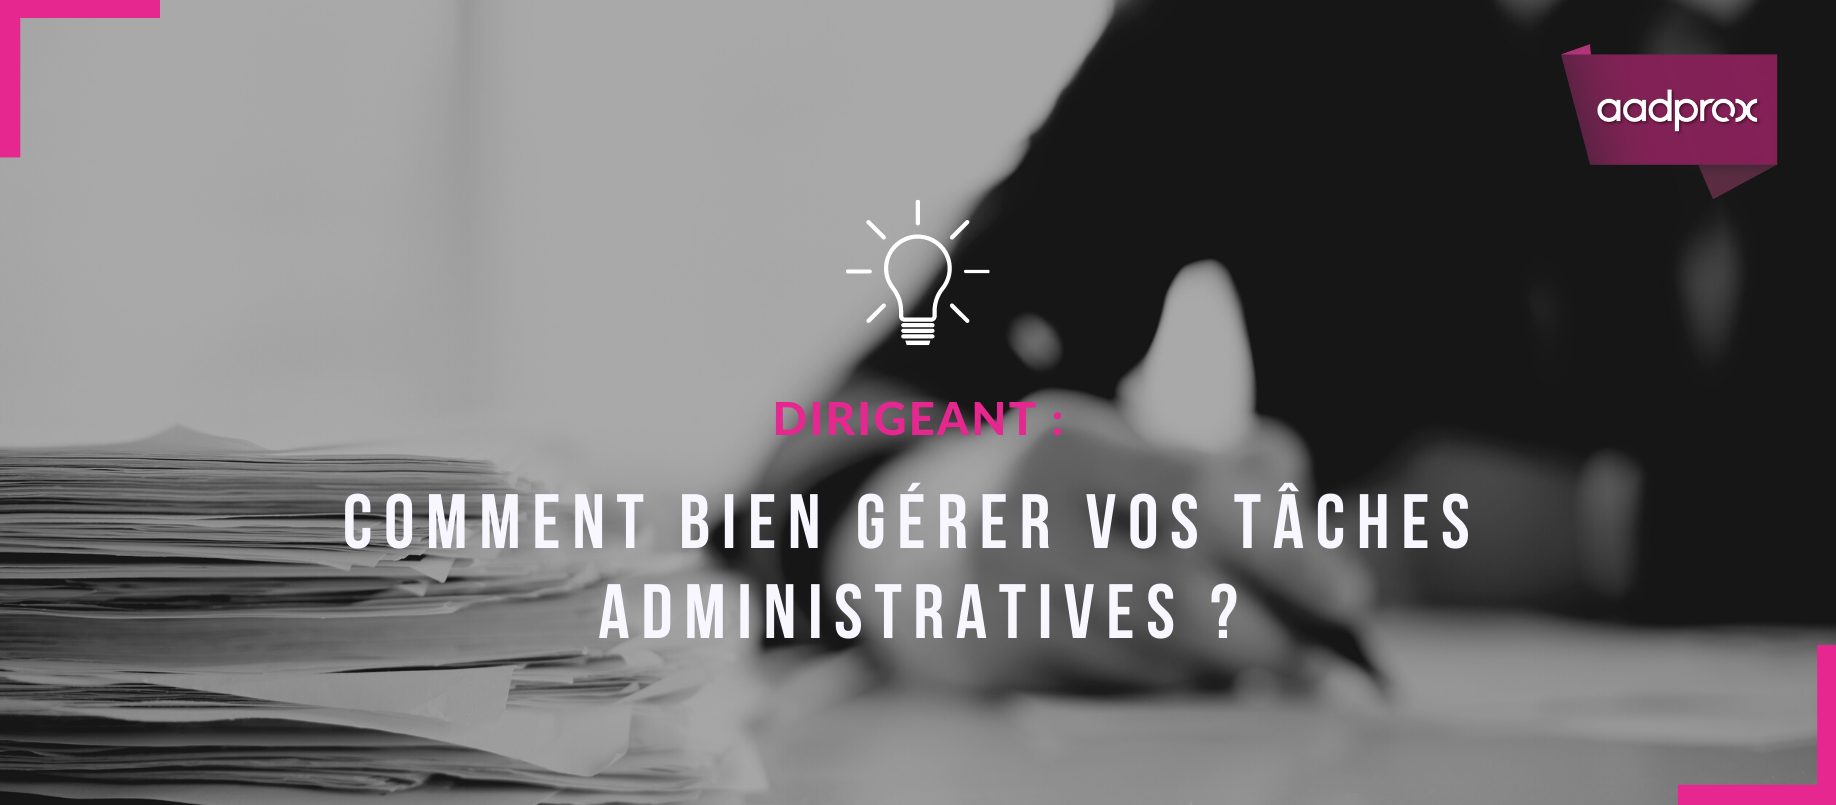 You are currently viewing Dirigeant : Comment bien gérer vos tâches administratives ?